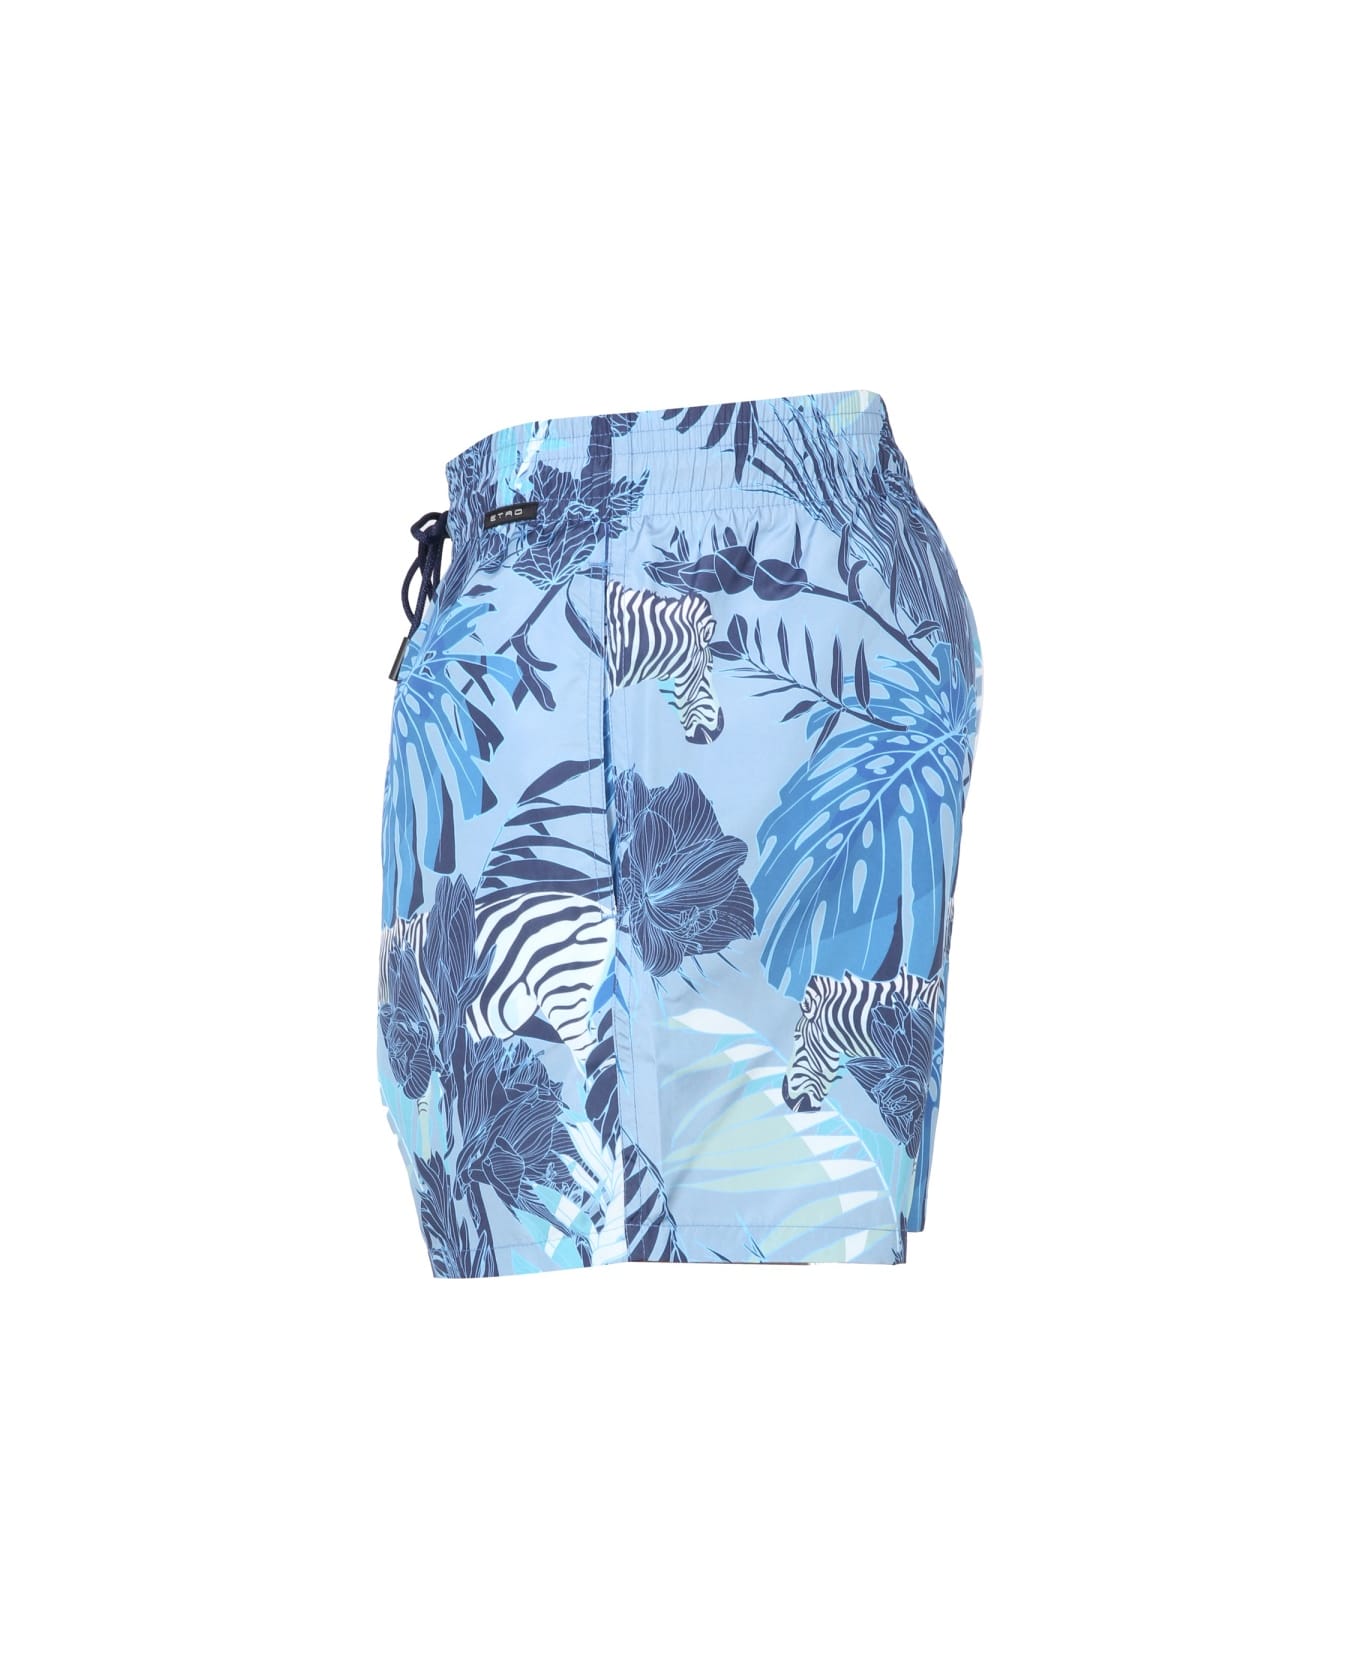 Etro Boxer Swimsuit With Maxi Floral Print - BLUE